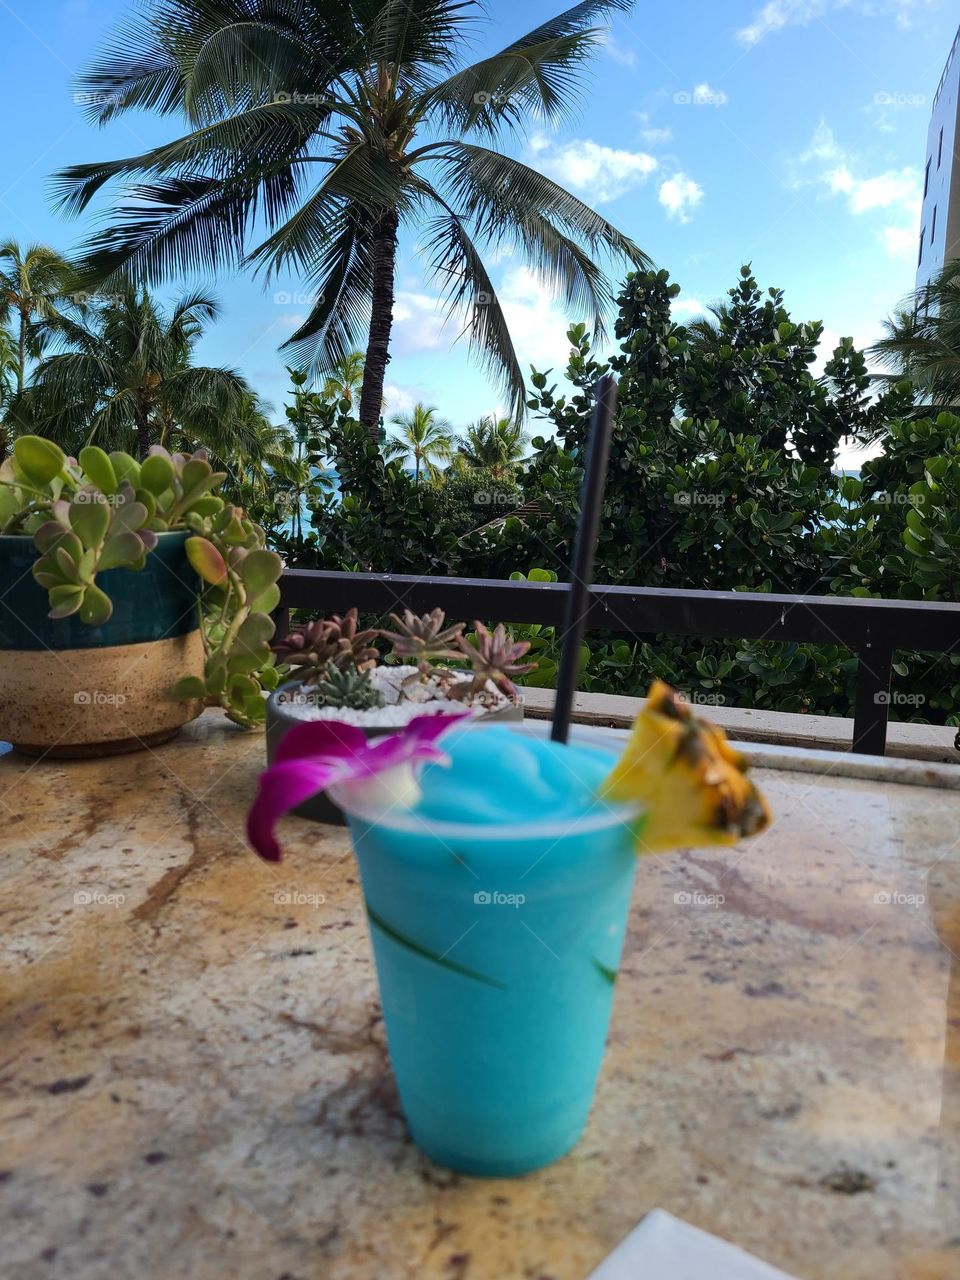 tropical blue drink in the background in hawaii with palm trees